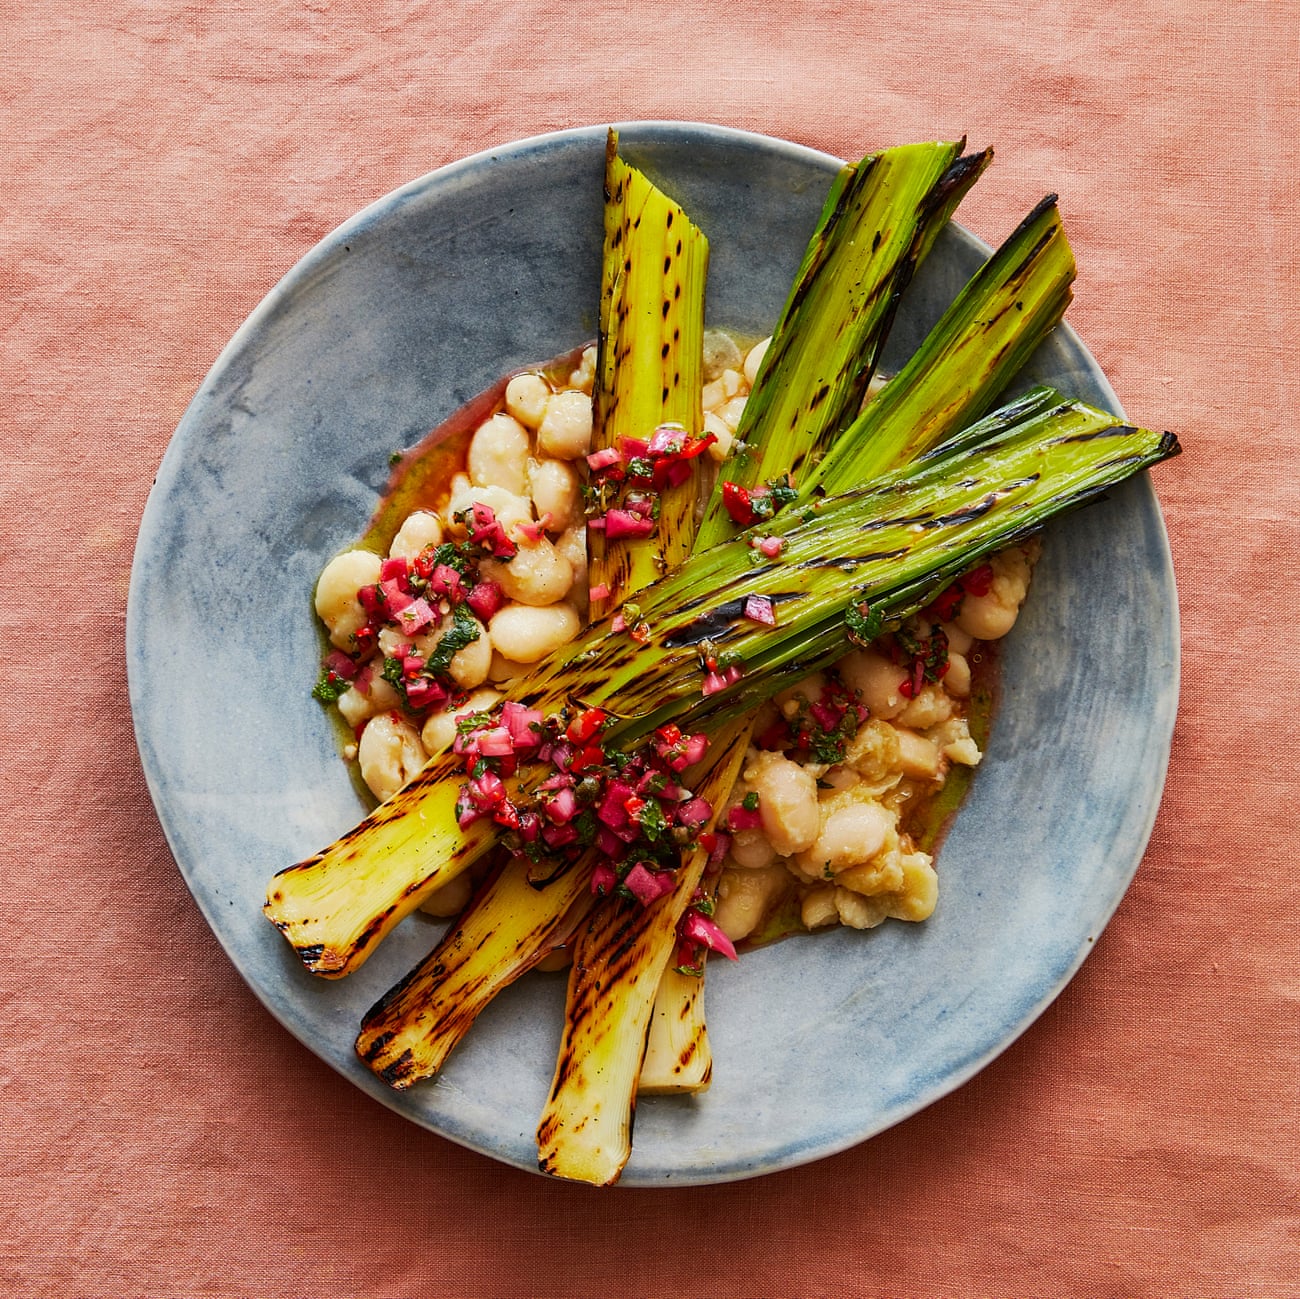 Thomasina Miers' griddled leeks, creamy white beans with a caper and mint relish.